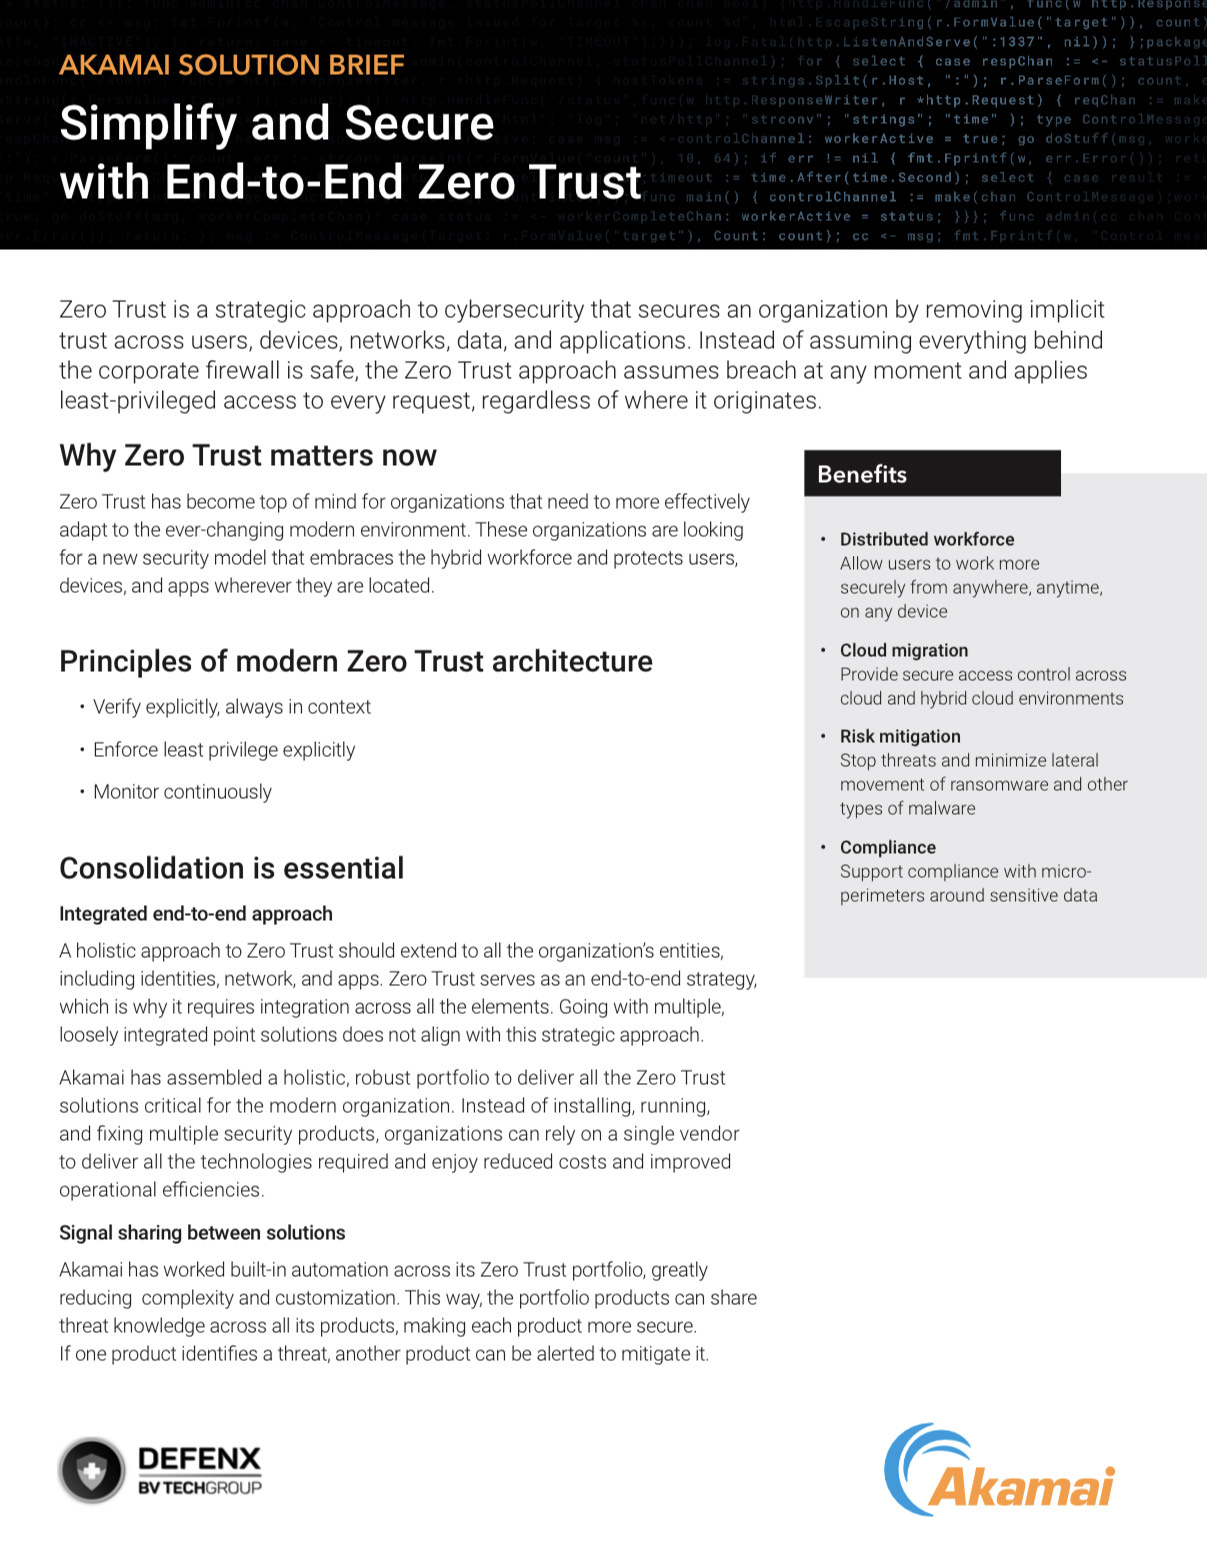 Simplify and Secure with End-to-End Zero Trust